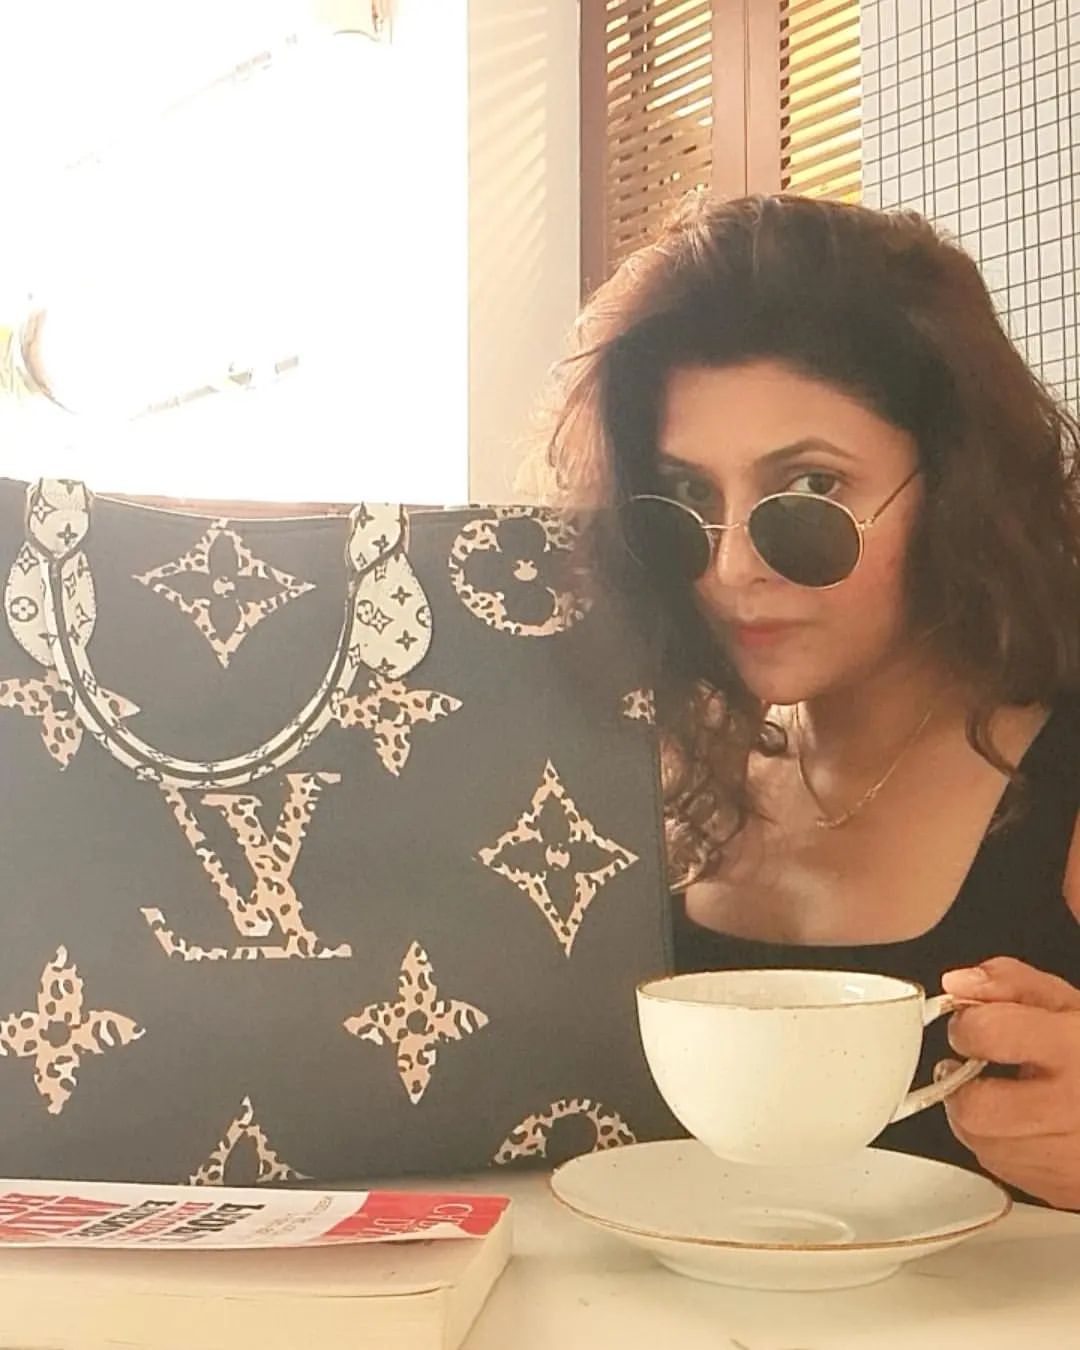 Luviena Lodh with a black hand bag and a cup of tea in hand